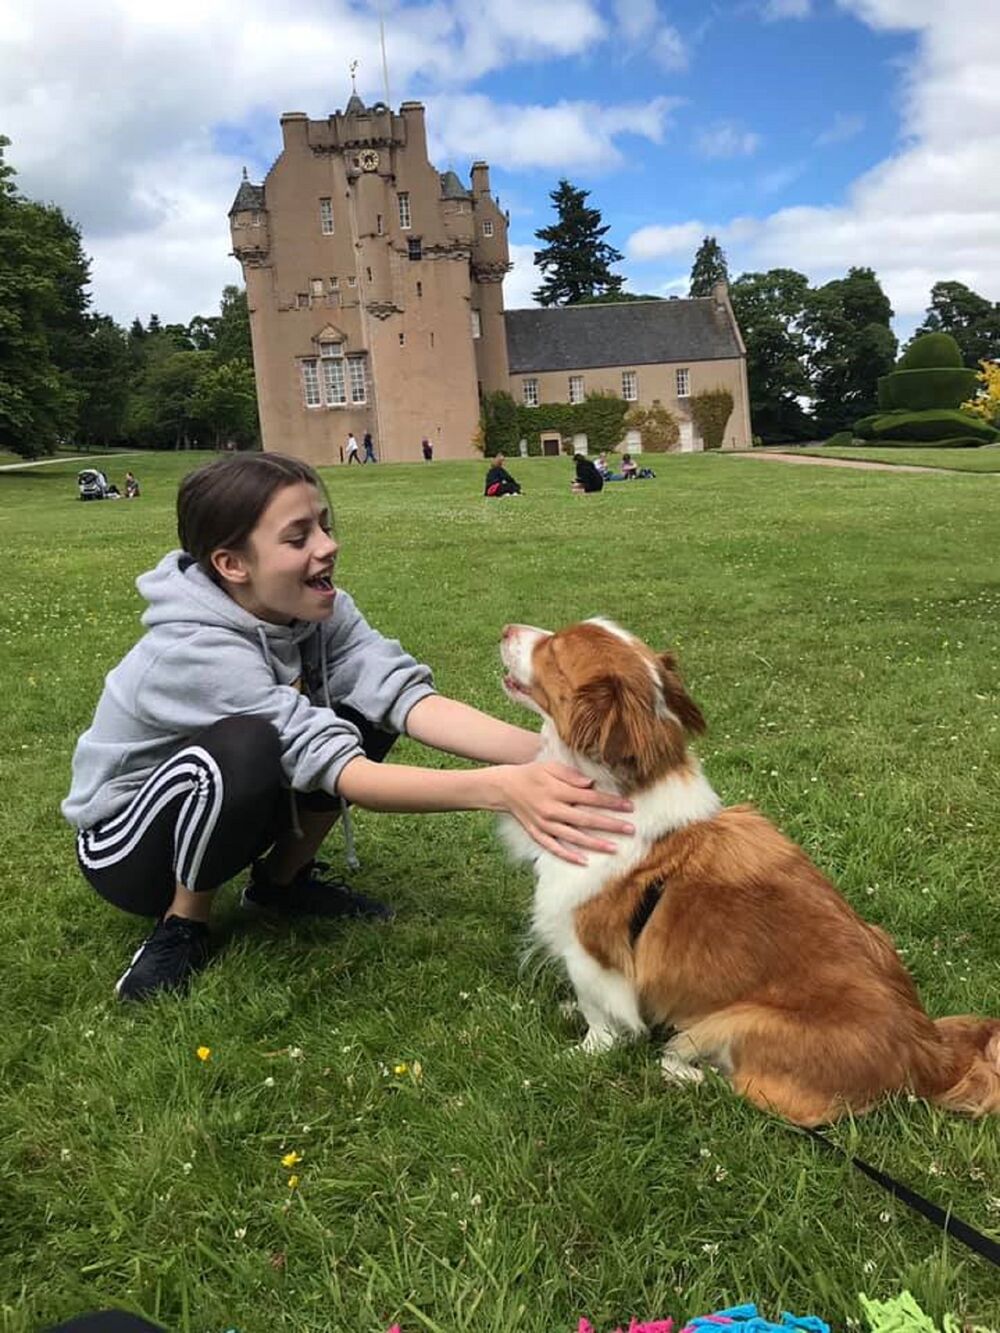 A smiling girl crouches down and pets a brown and white dog on the lawn in front of Crathes Castle. The dog appears to smile at the girl and sits nicely, her lead lying on the grass beside her.